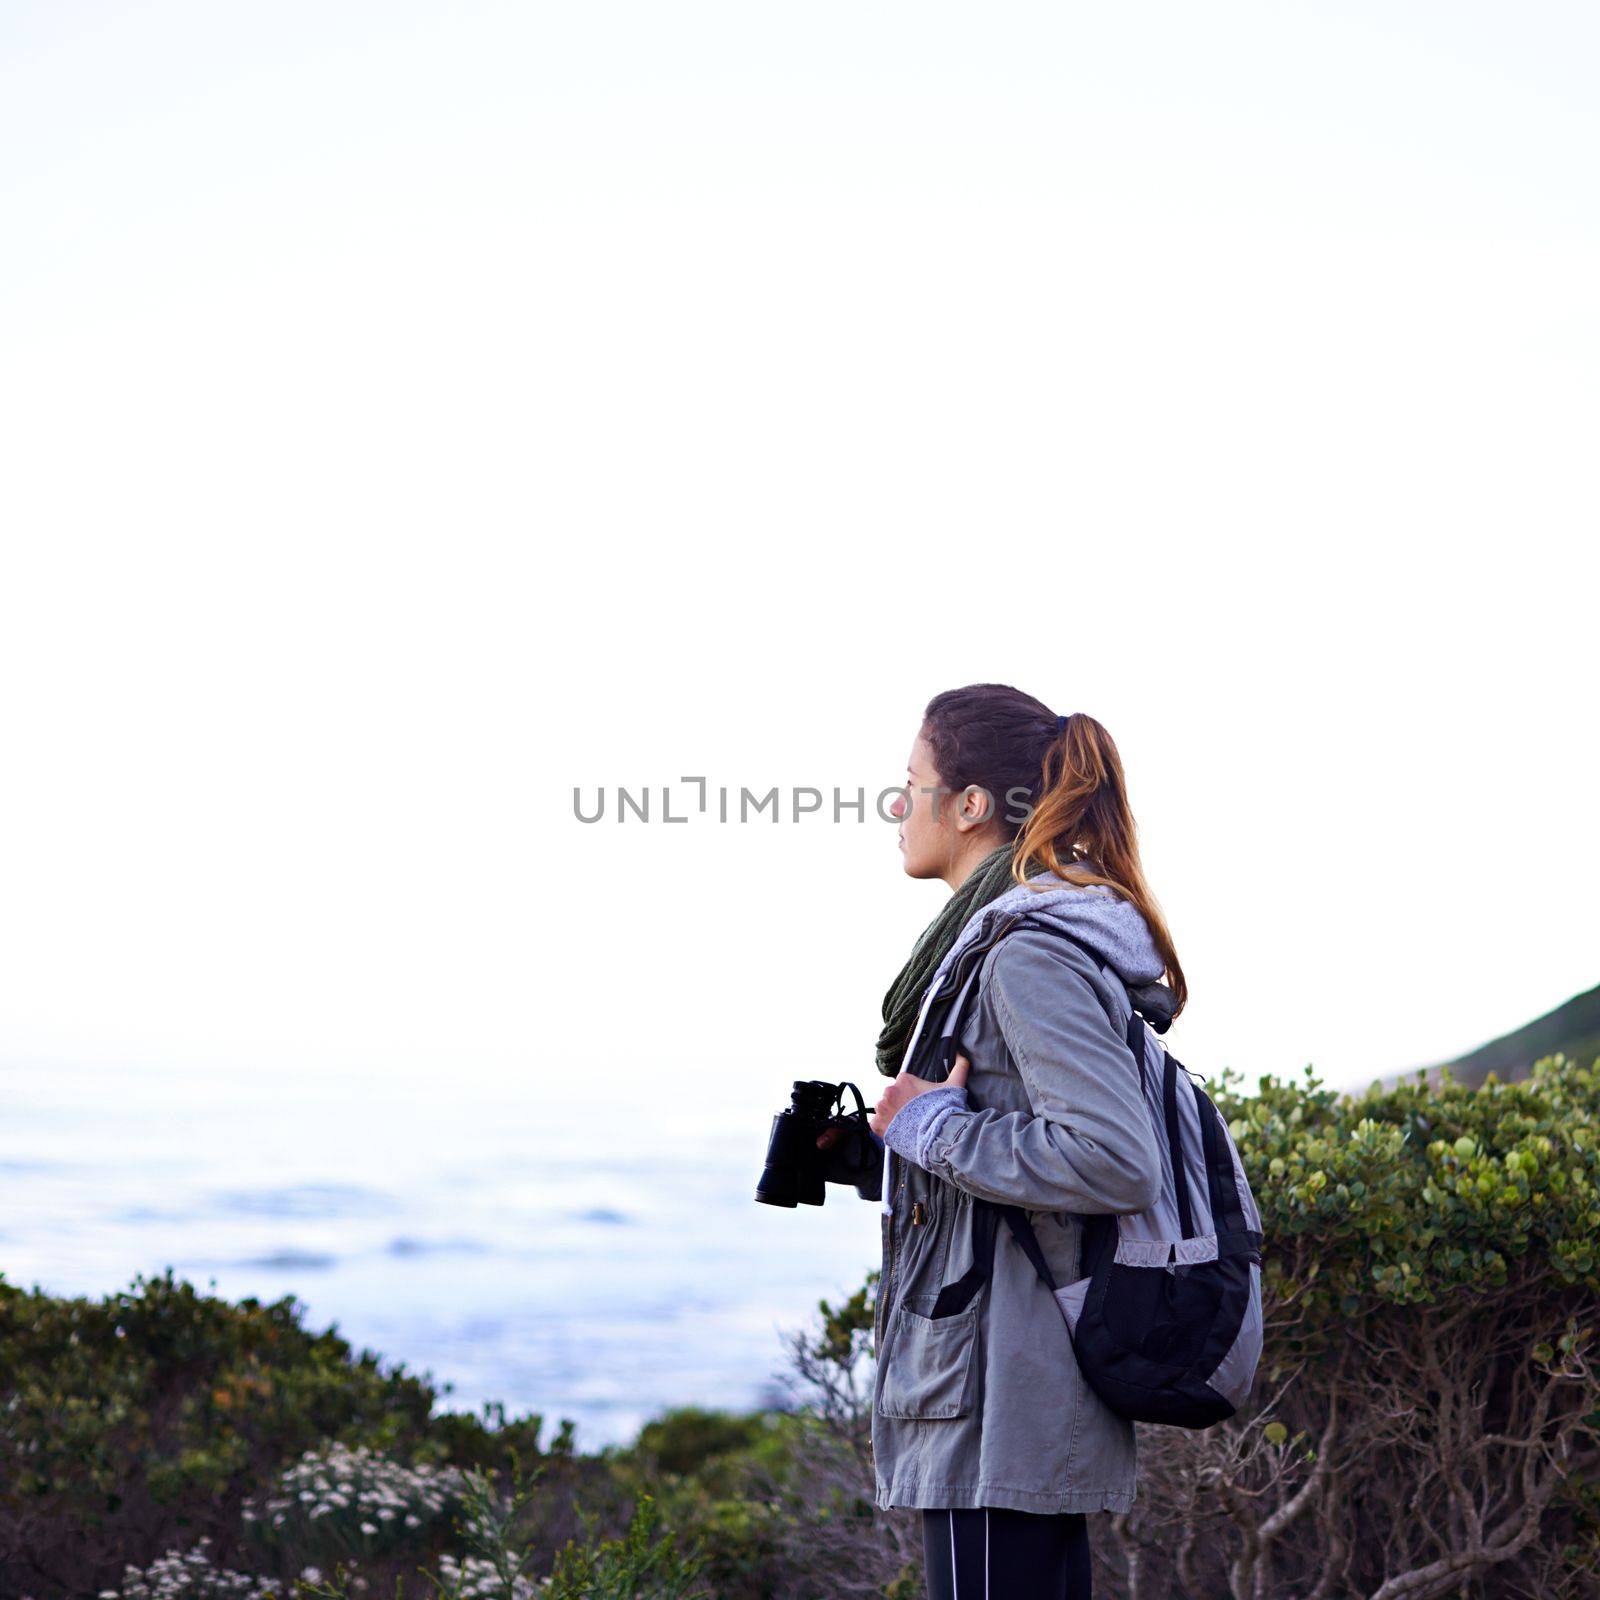 Appreciating the beauty of nature. a young woman using binoculars while out hiking